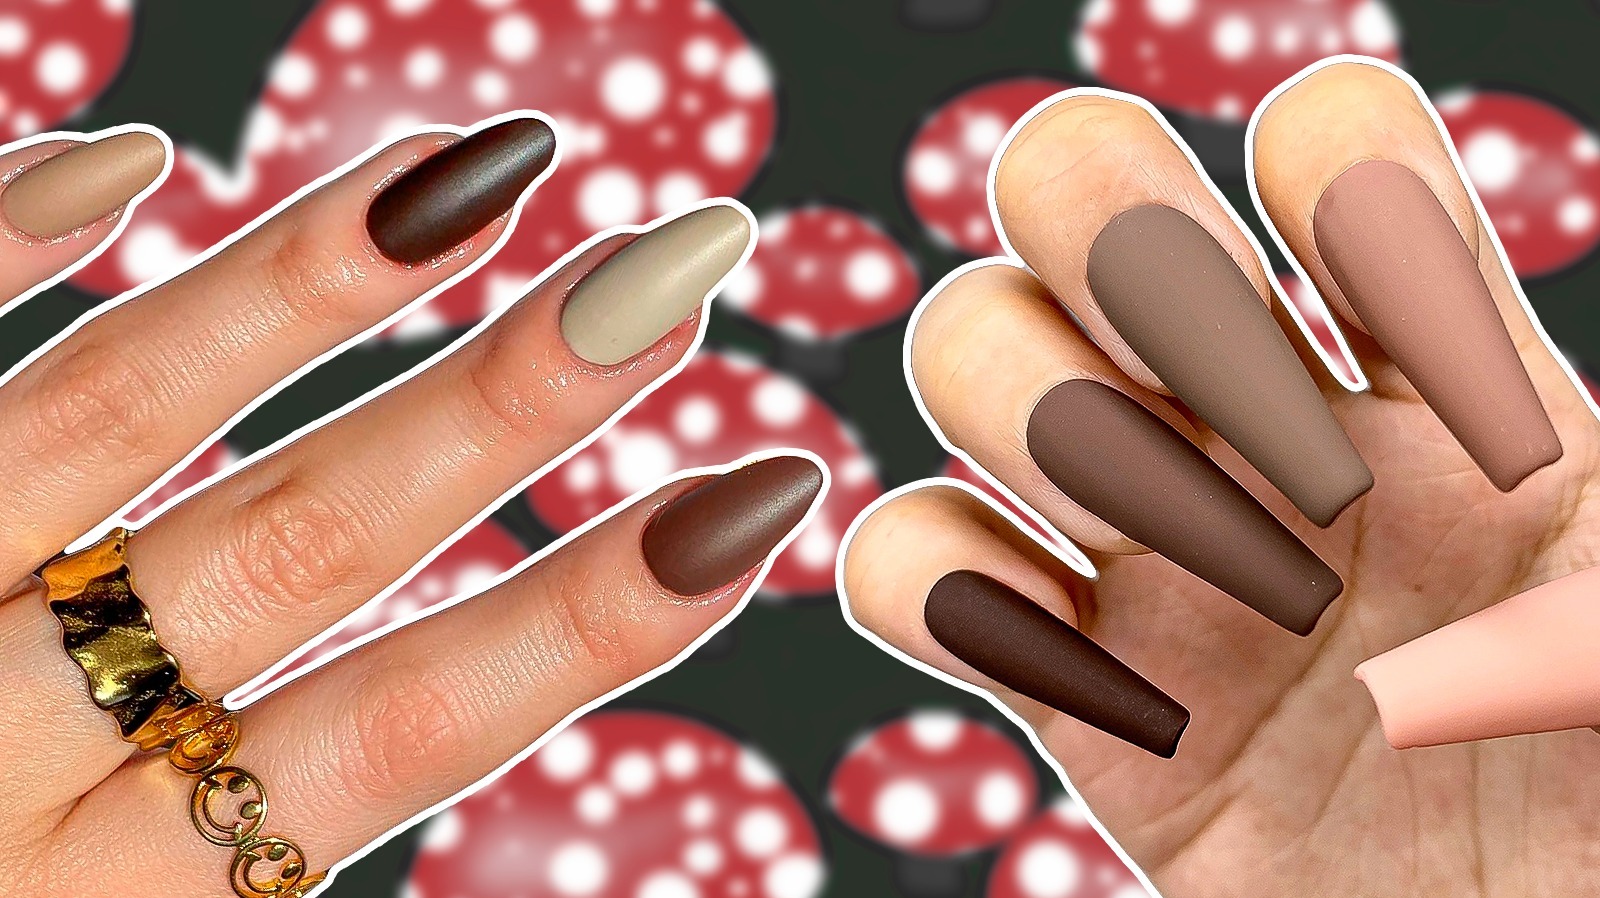 10 Chocolate Nail Colors to Try This Season - The Beauty Look Book